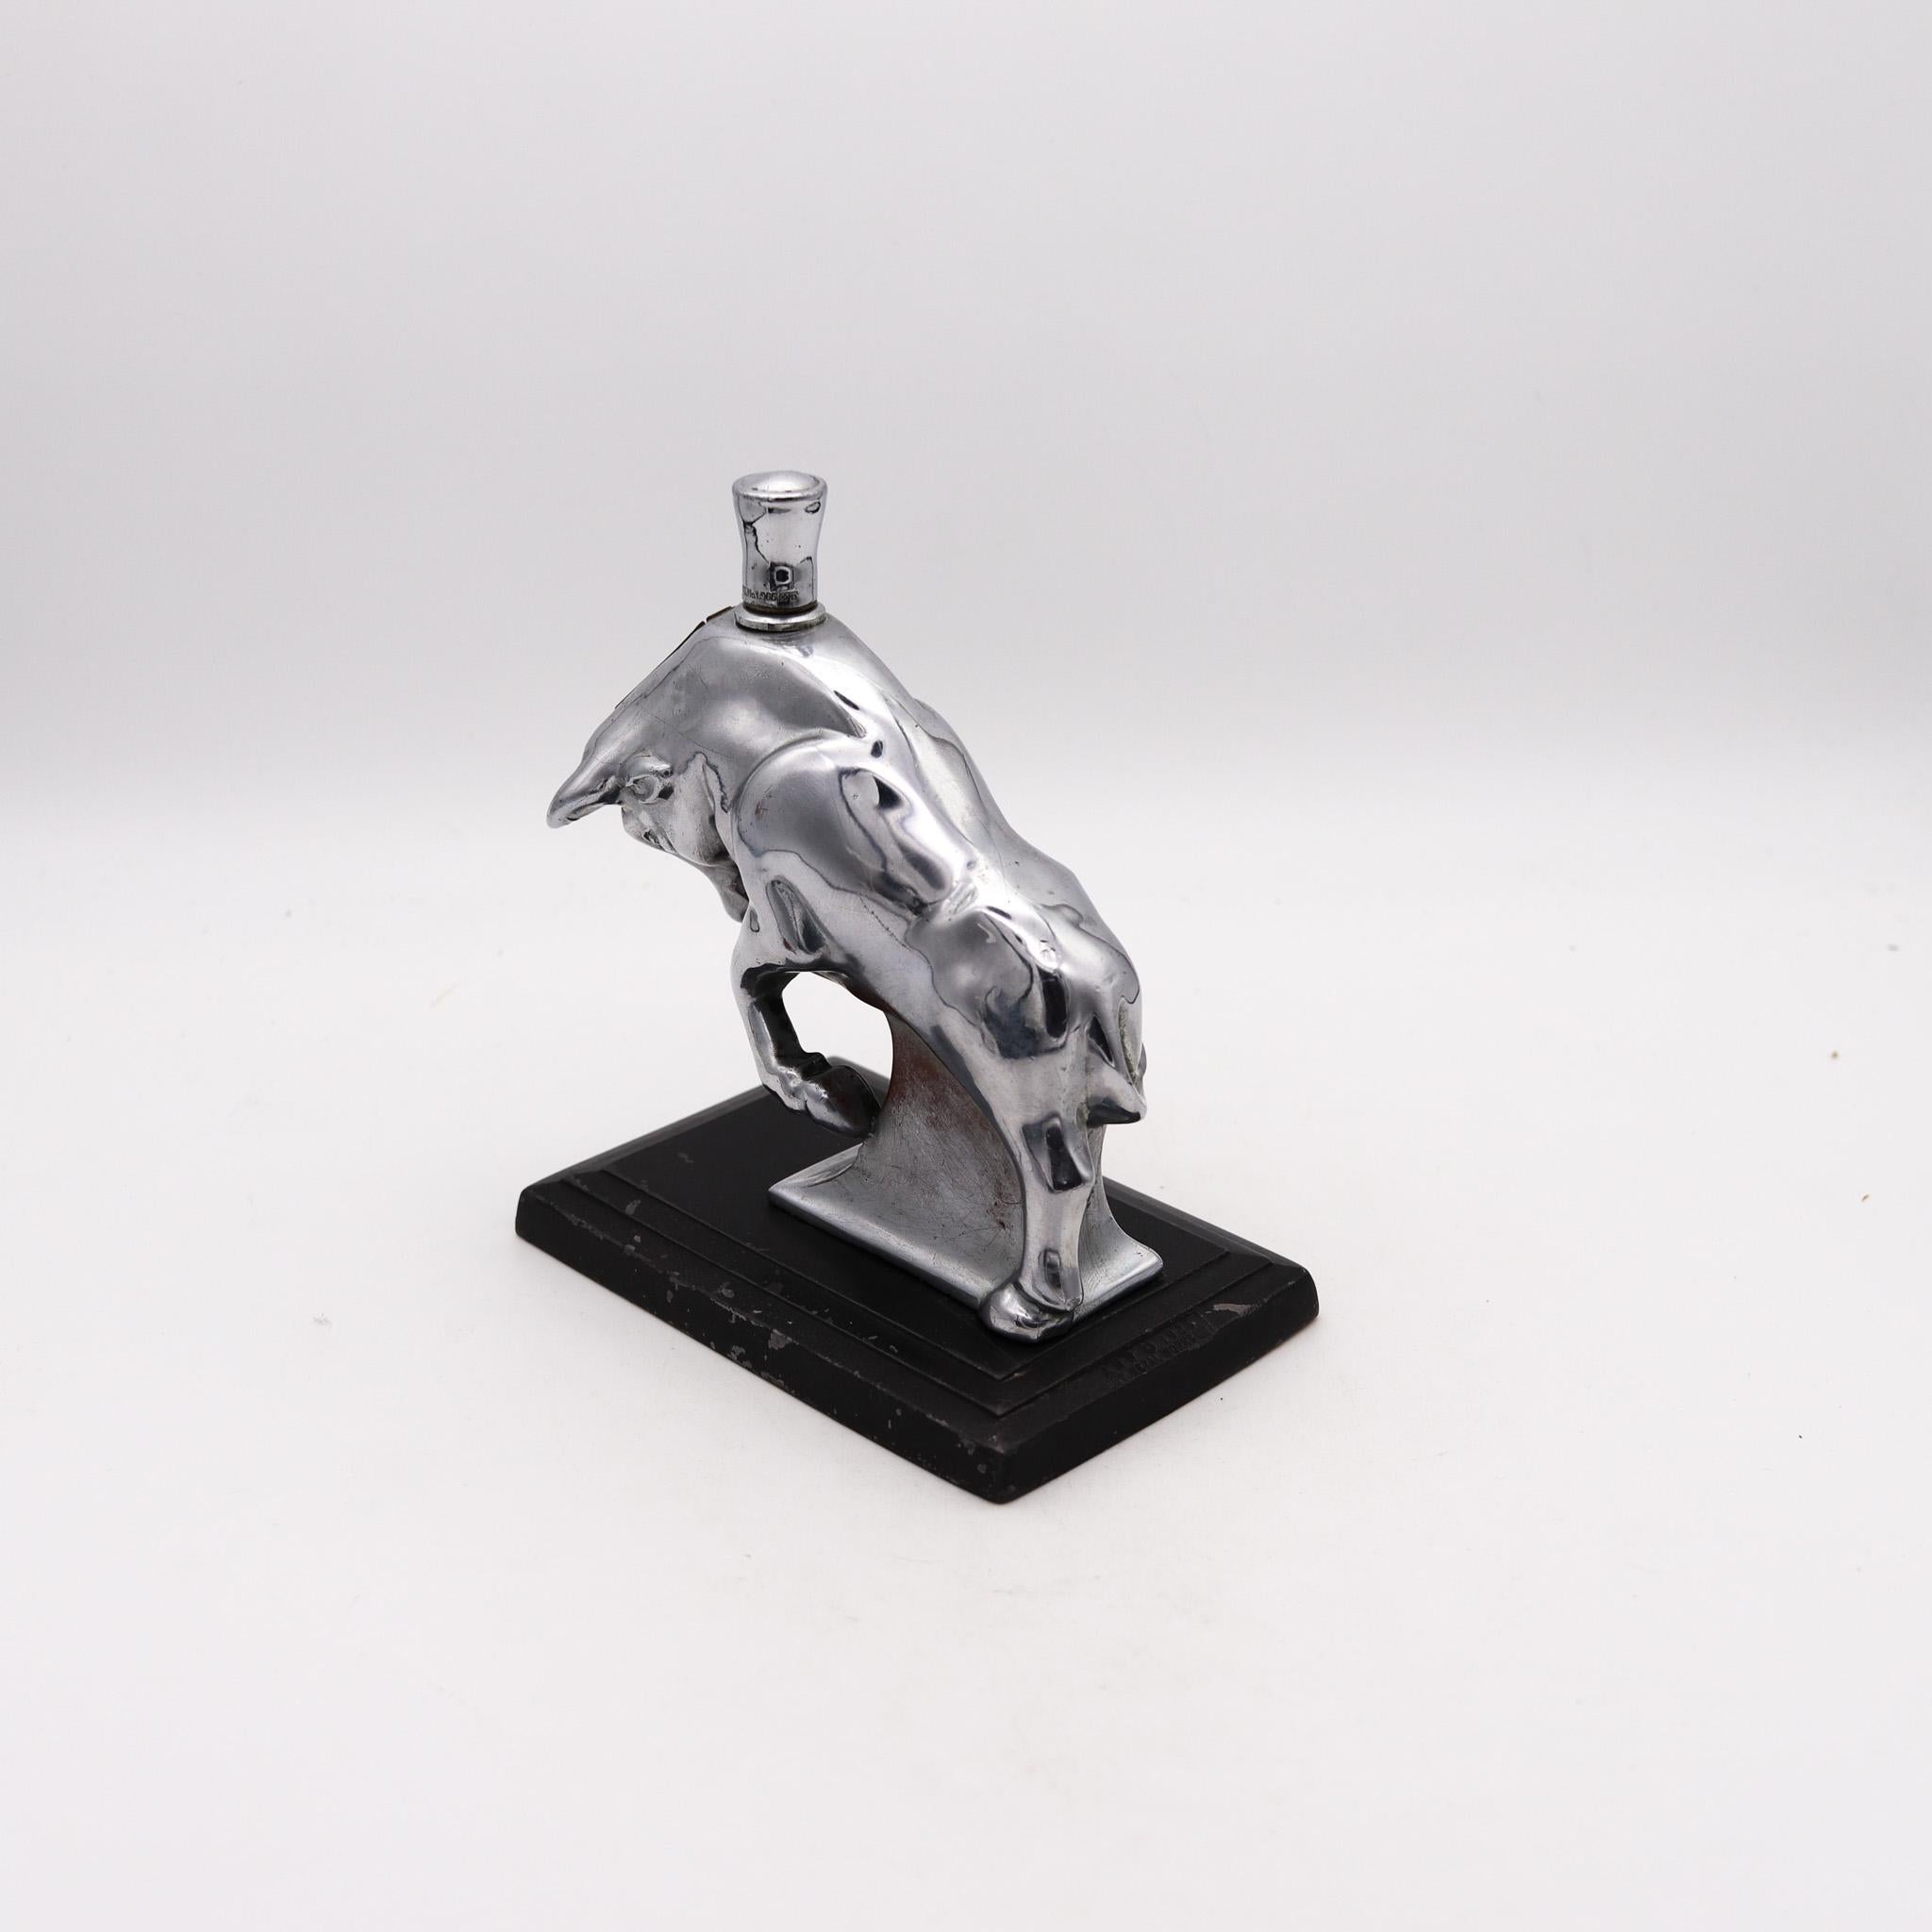 Desk buffalo touch tip Striker designed by Ronson.

The striker lighters made by Ronson are famous under collectors. This extremely rare desk Striker Lighter was created in New Jersey United States by The Art Metal Works for The Ronson Co. during